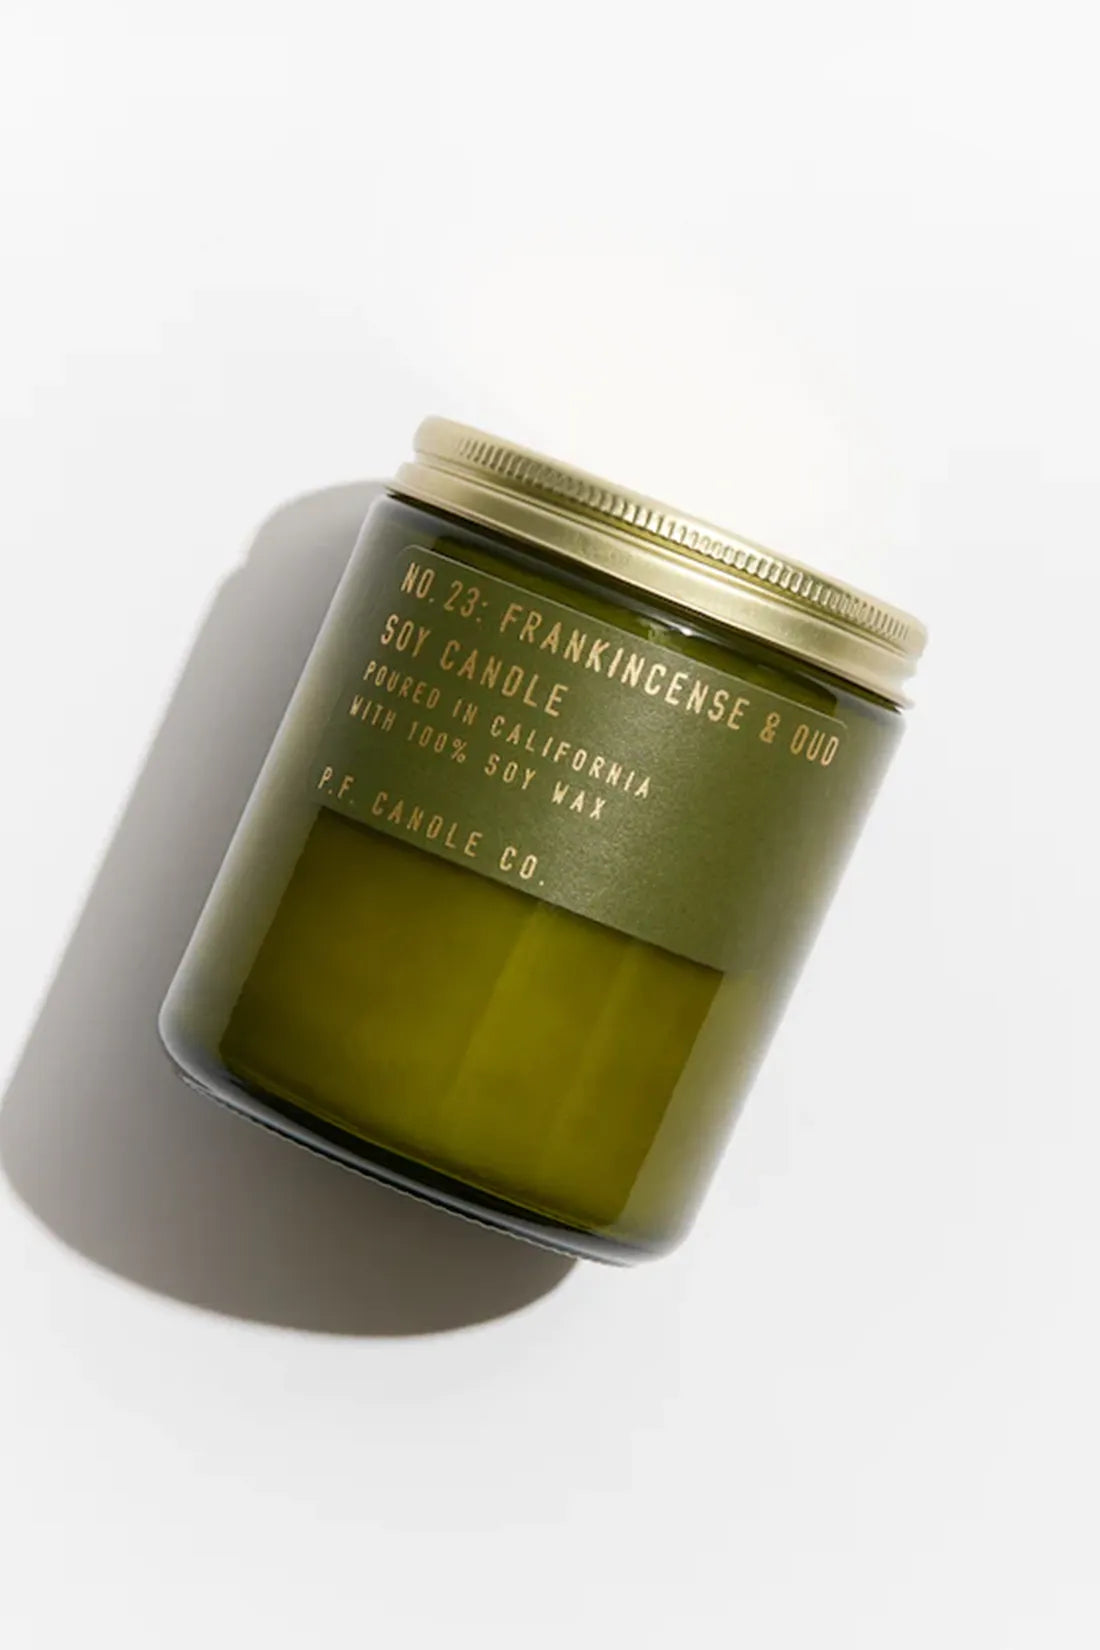 Frankincense & Oud Alchemy Soy Candle